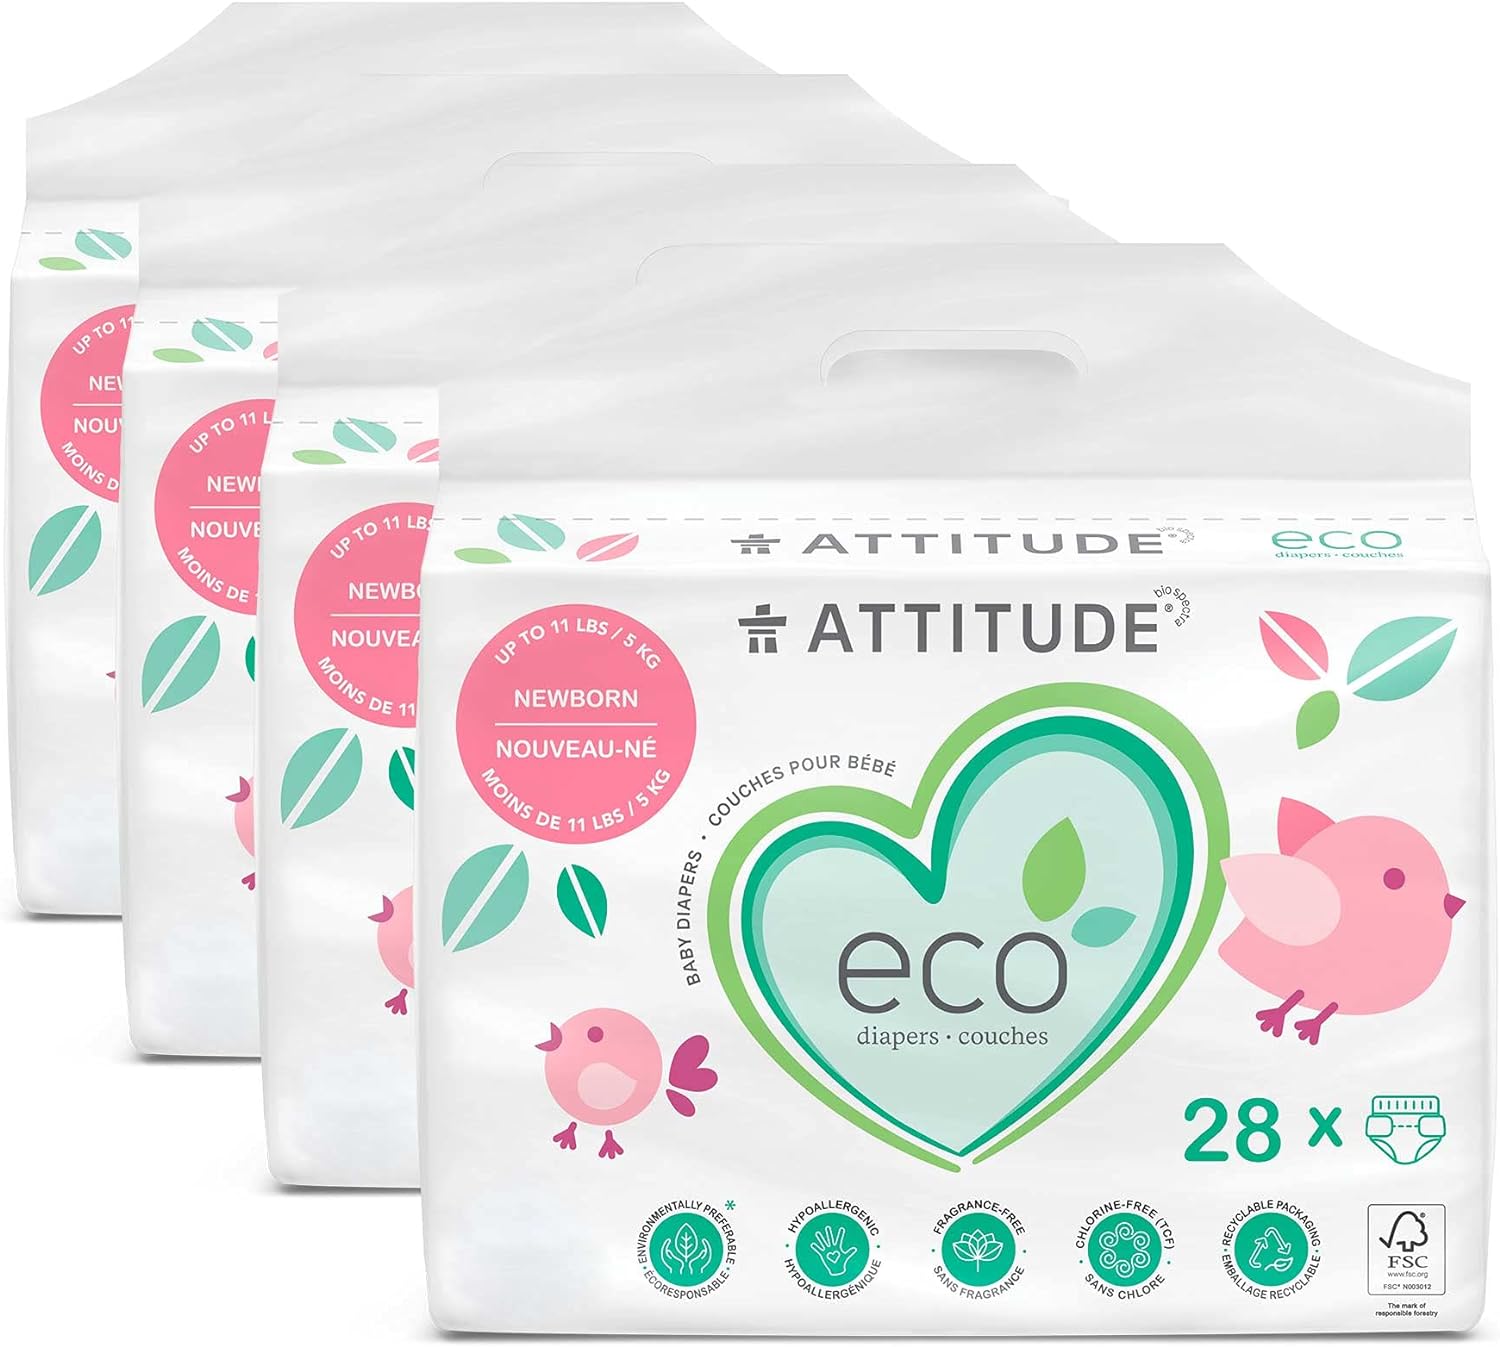 ATTITUDE Non-Toxic Diapers, Eco-Friendly, Safe for Sensitive Skin, Chlorine-Free, Leak-Free & Biodegradable Baby Diapers, Plain White, Newborn (Up to 11 lbs), 112 Count (4 Packs of 28)